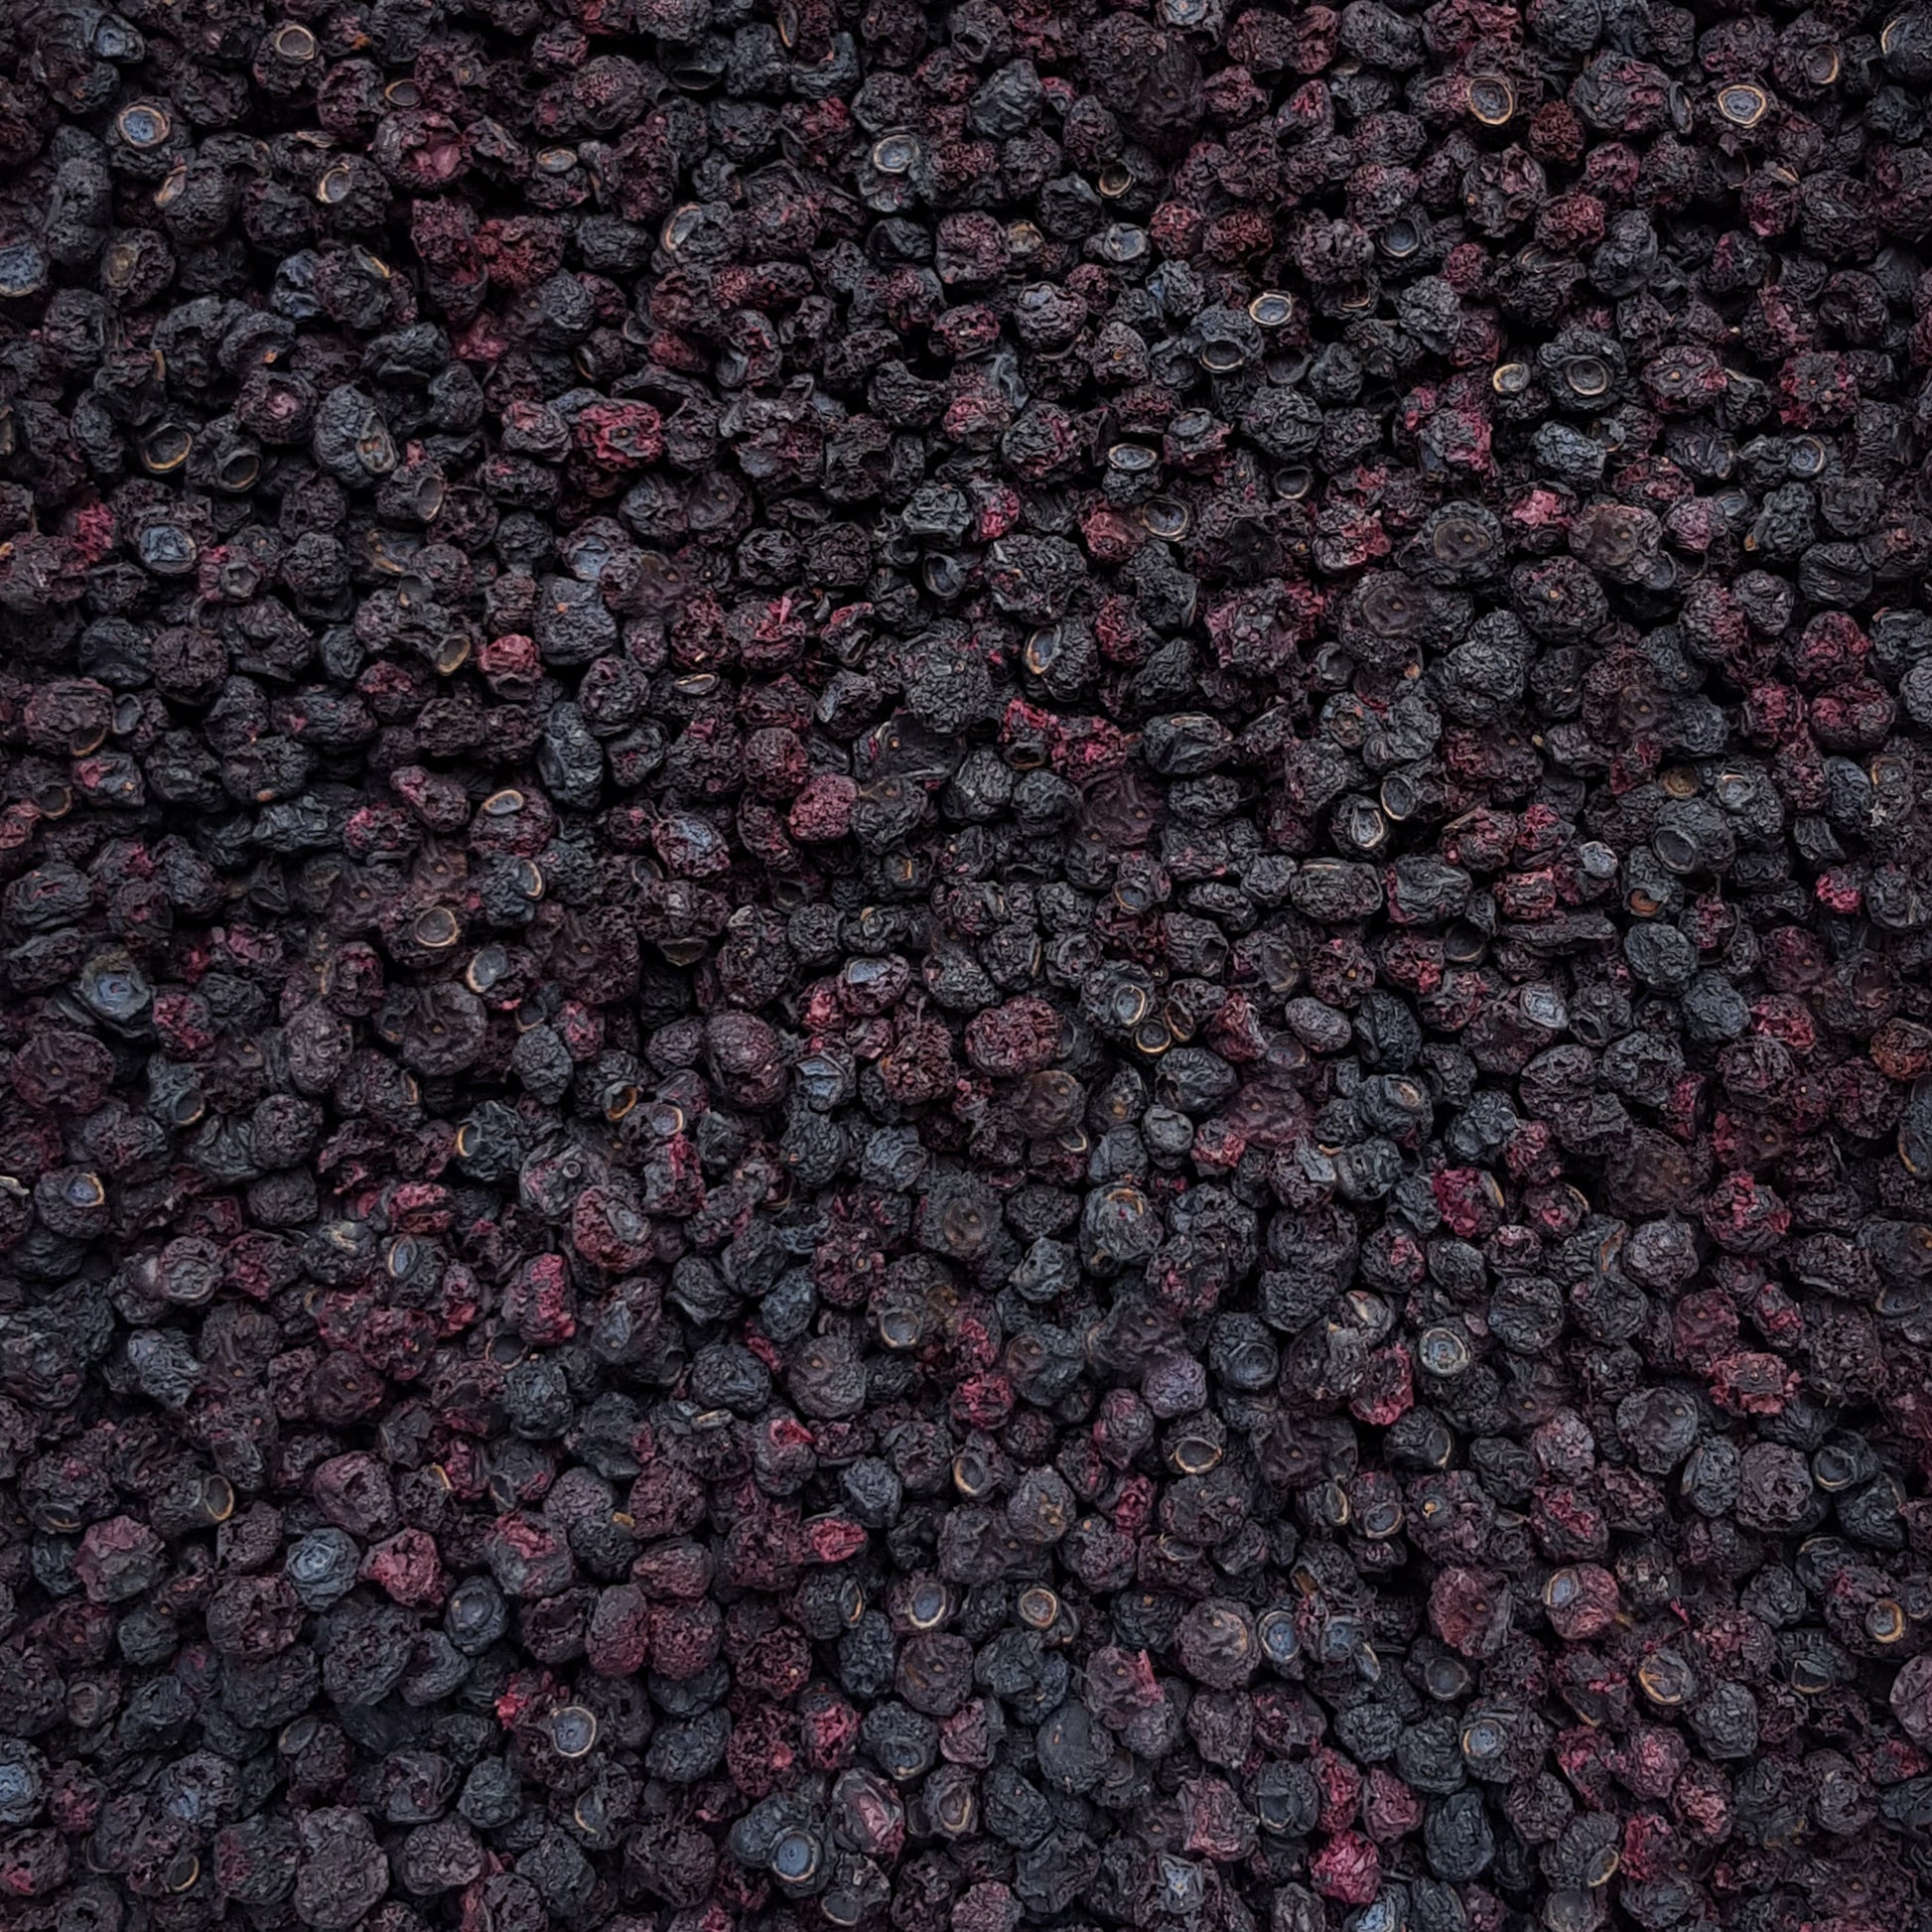 Full frame overhead image of BY NATURE Dried Blueberries - preservative-free.